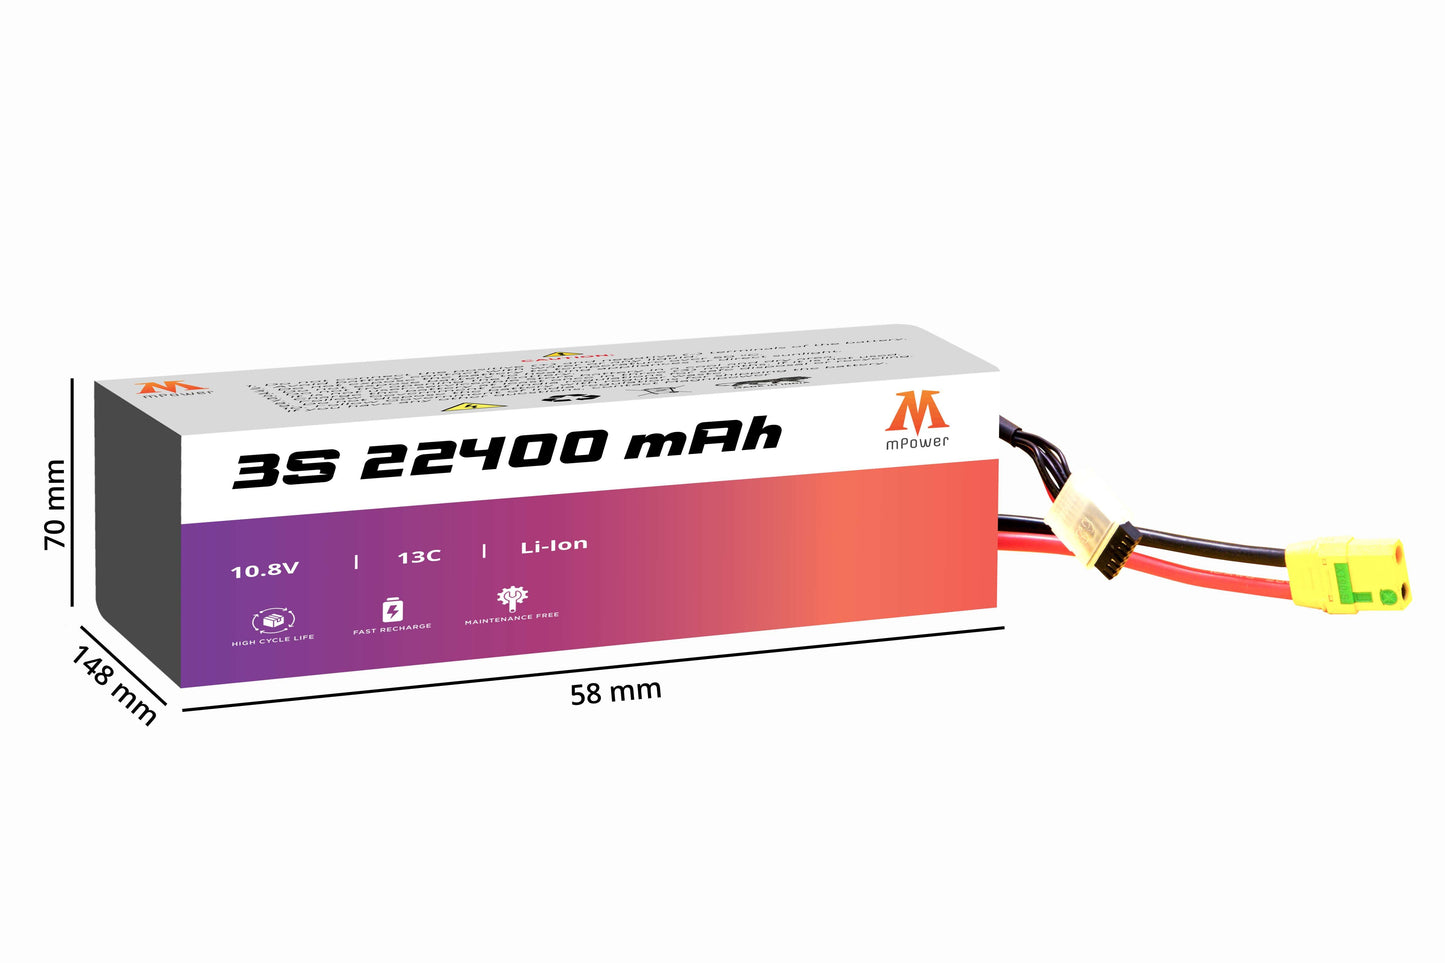 mPower 3S 22400mAh Lithium-Ion Battery for Survey Drones